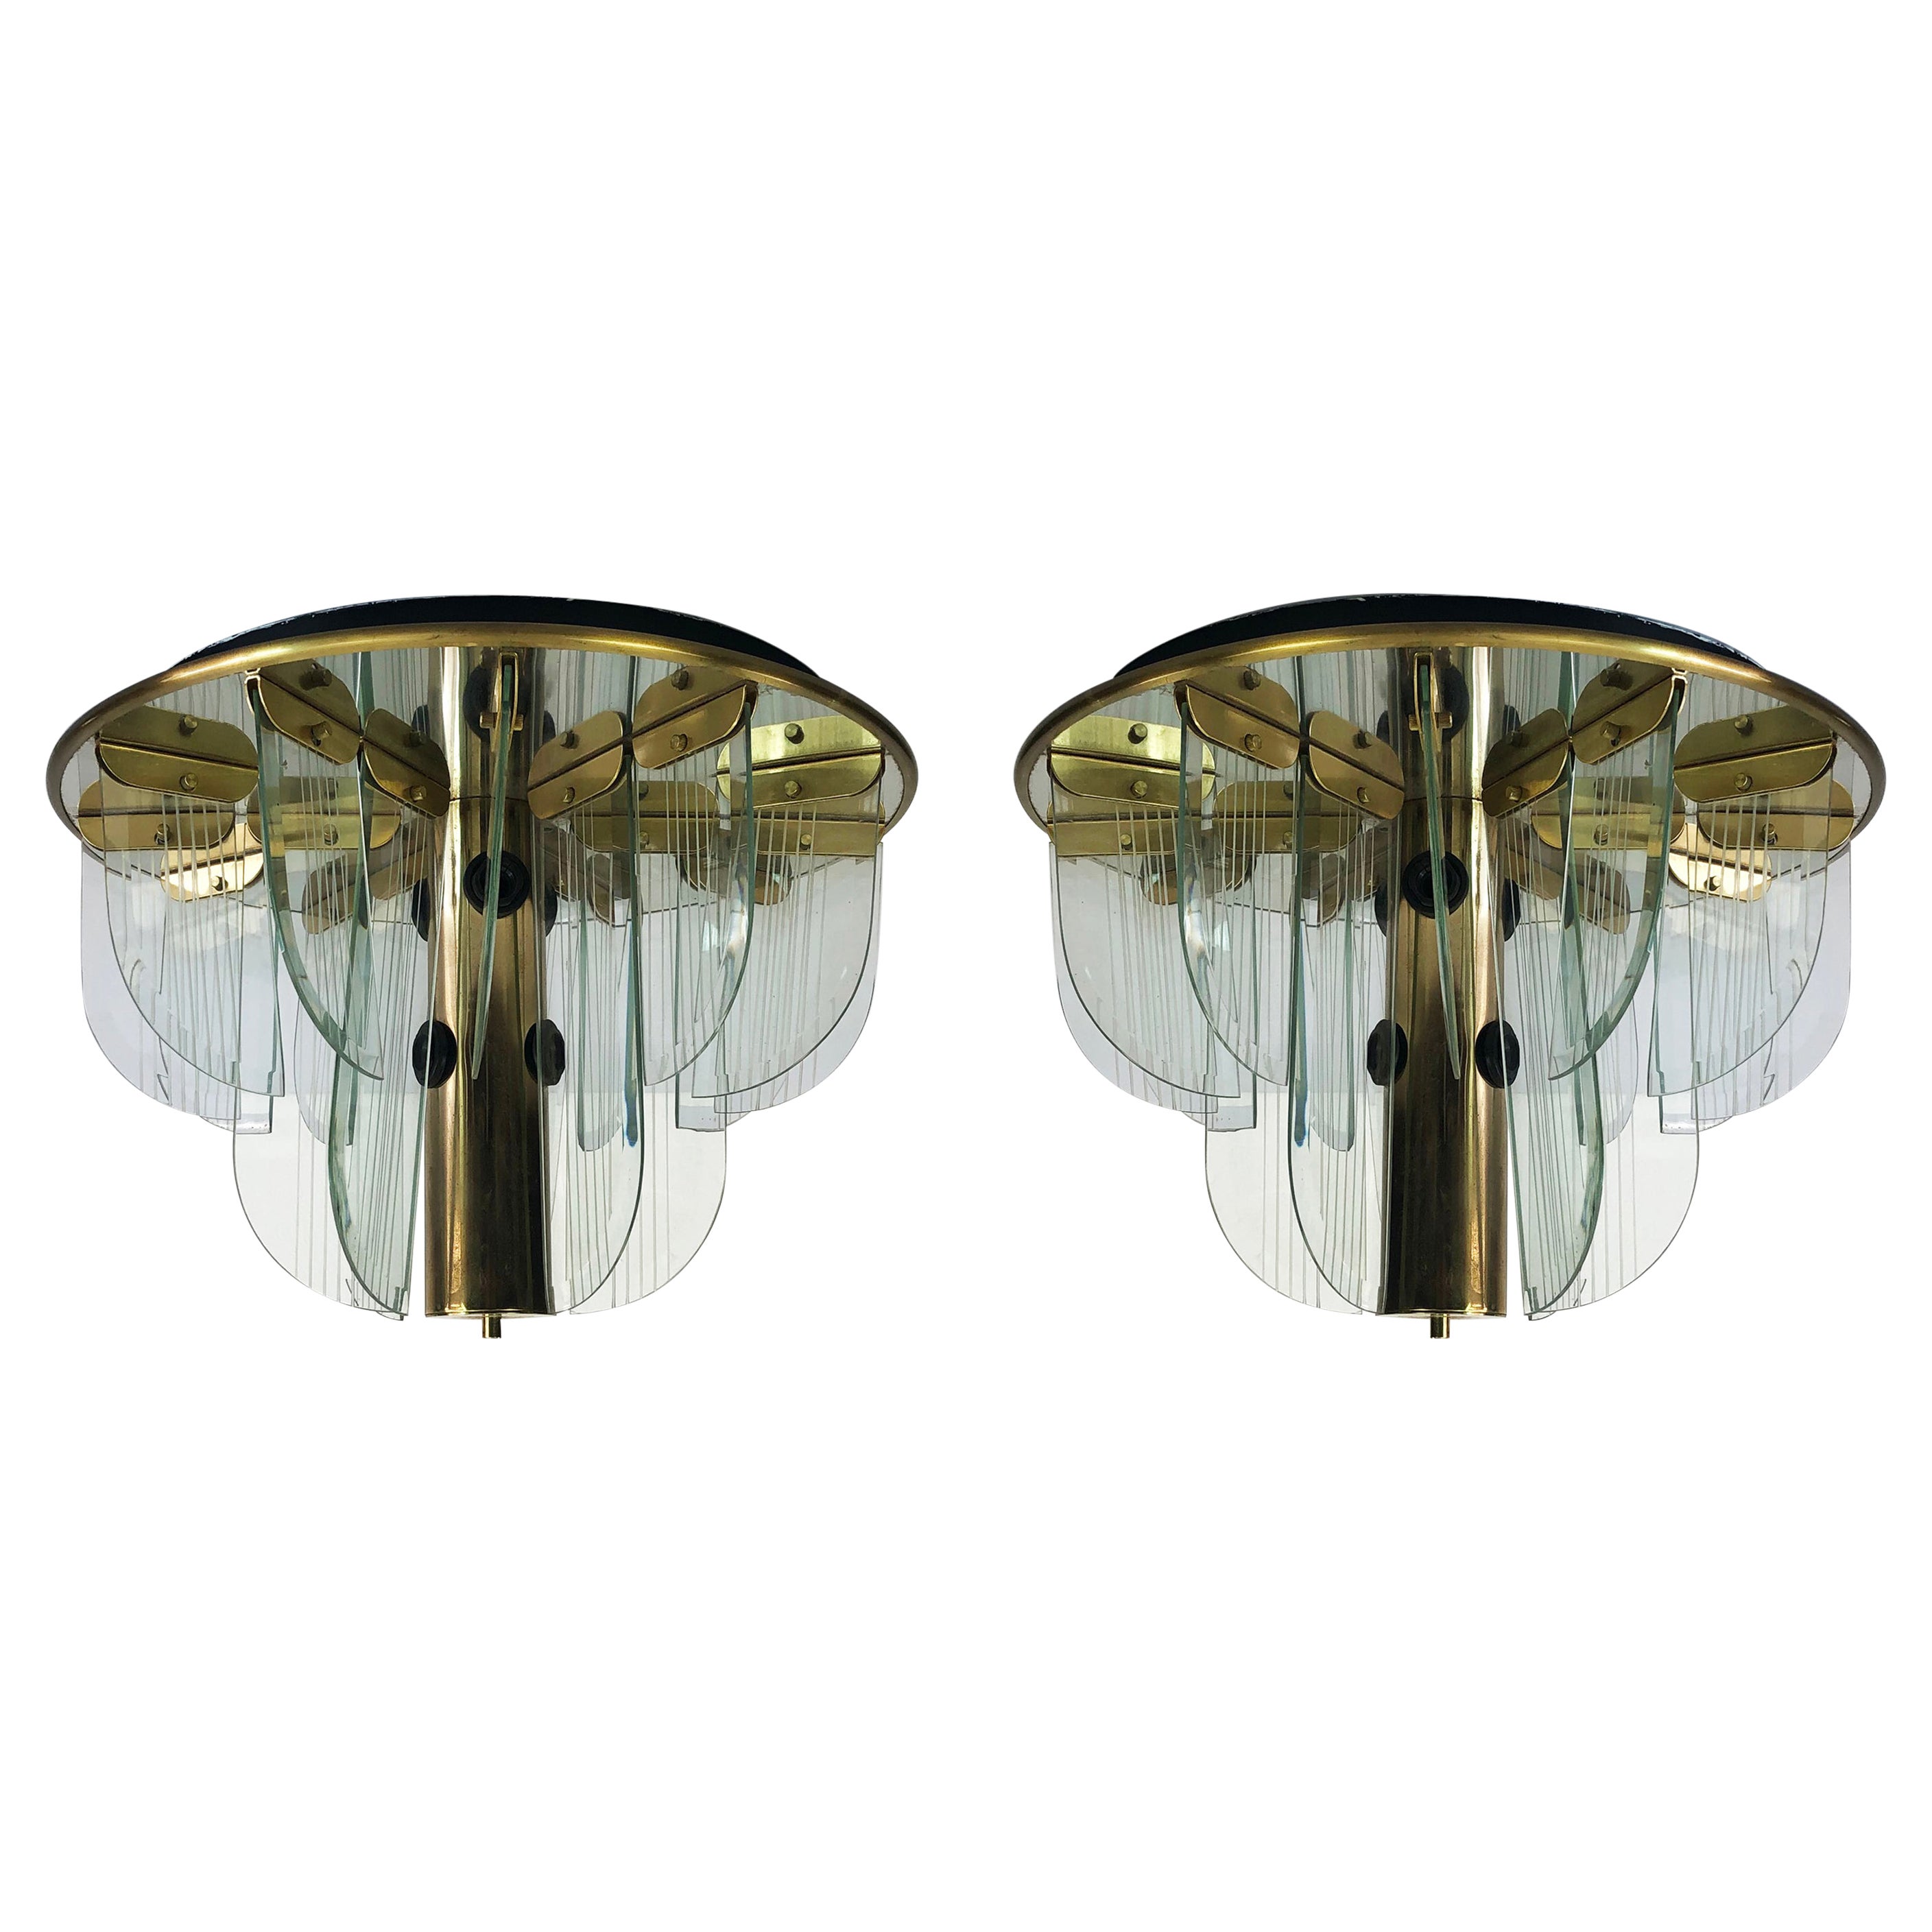 Pair of Mount Ceiling Lights Attributed to Lightolier For Sale